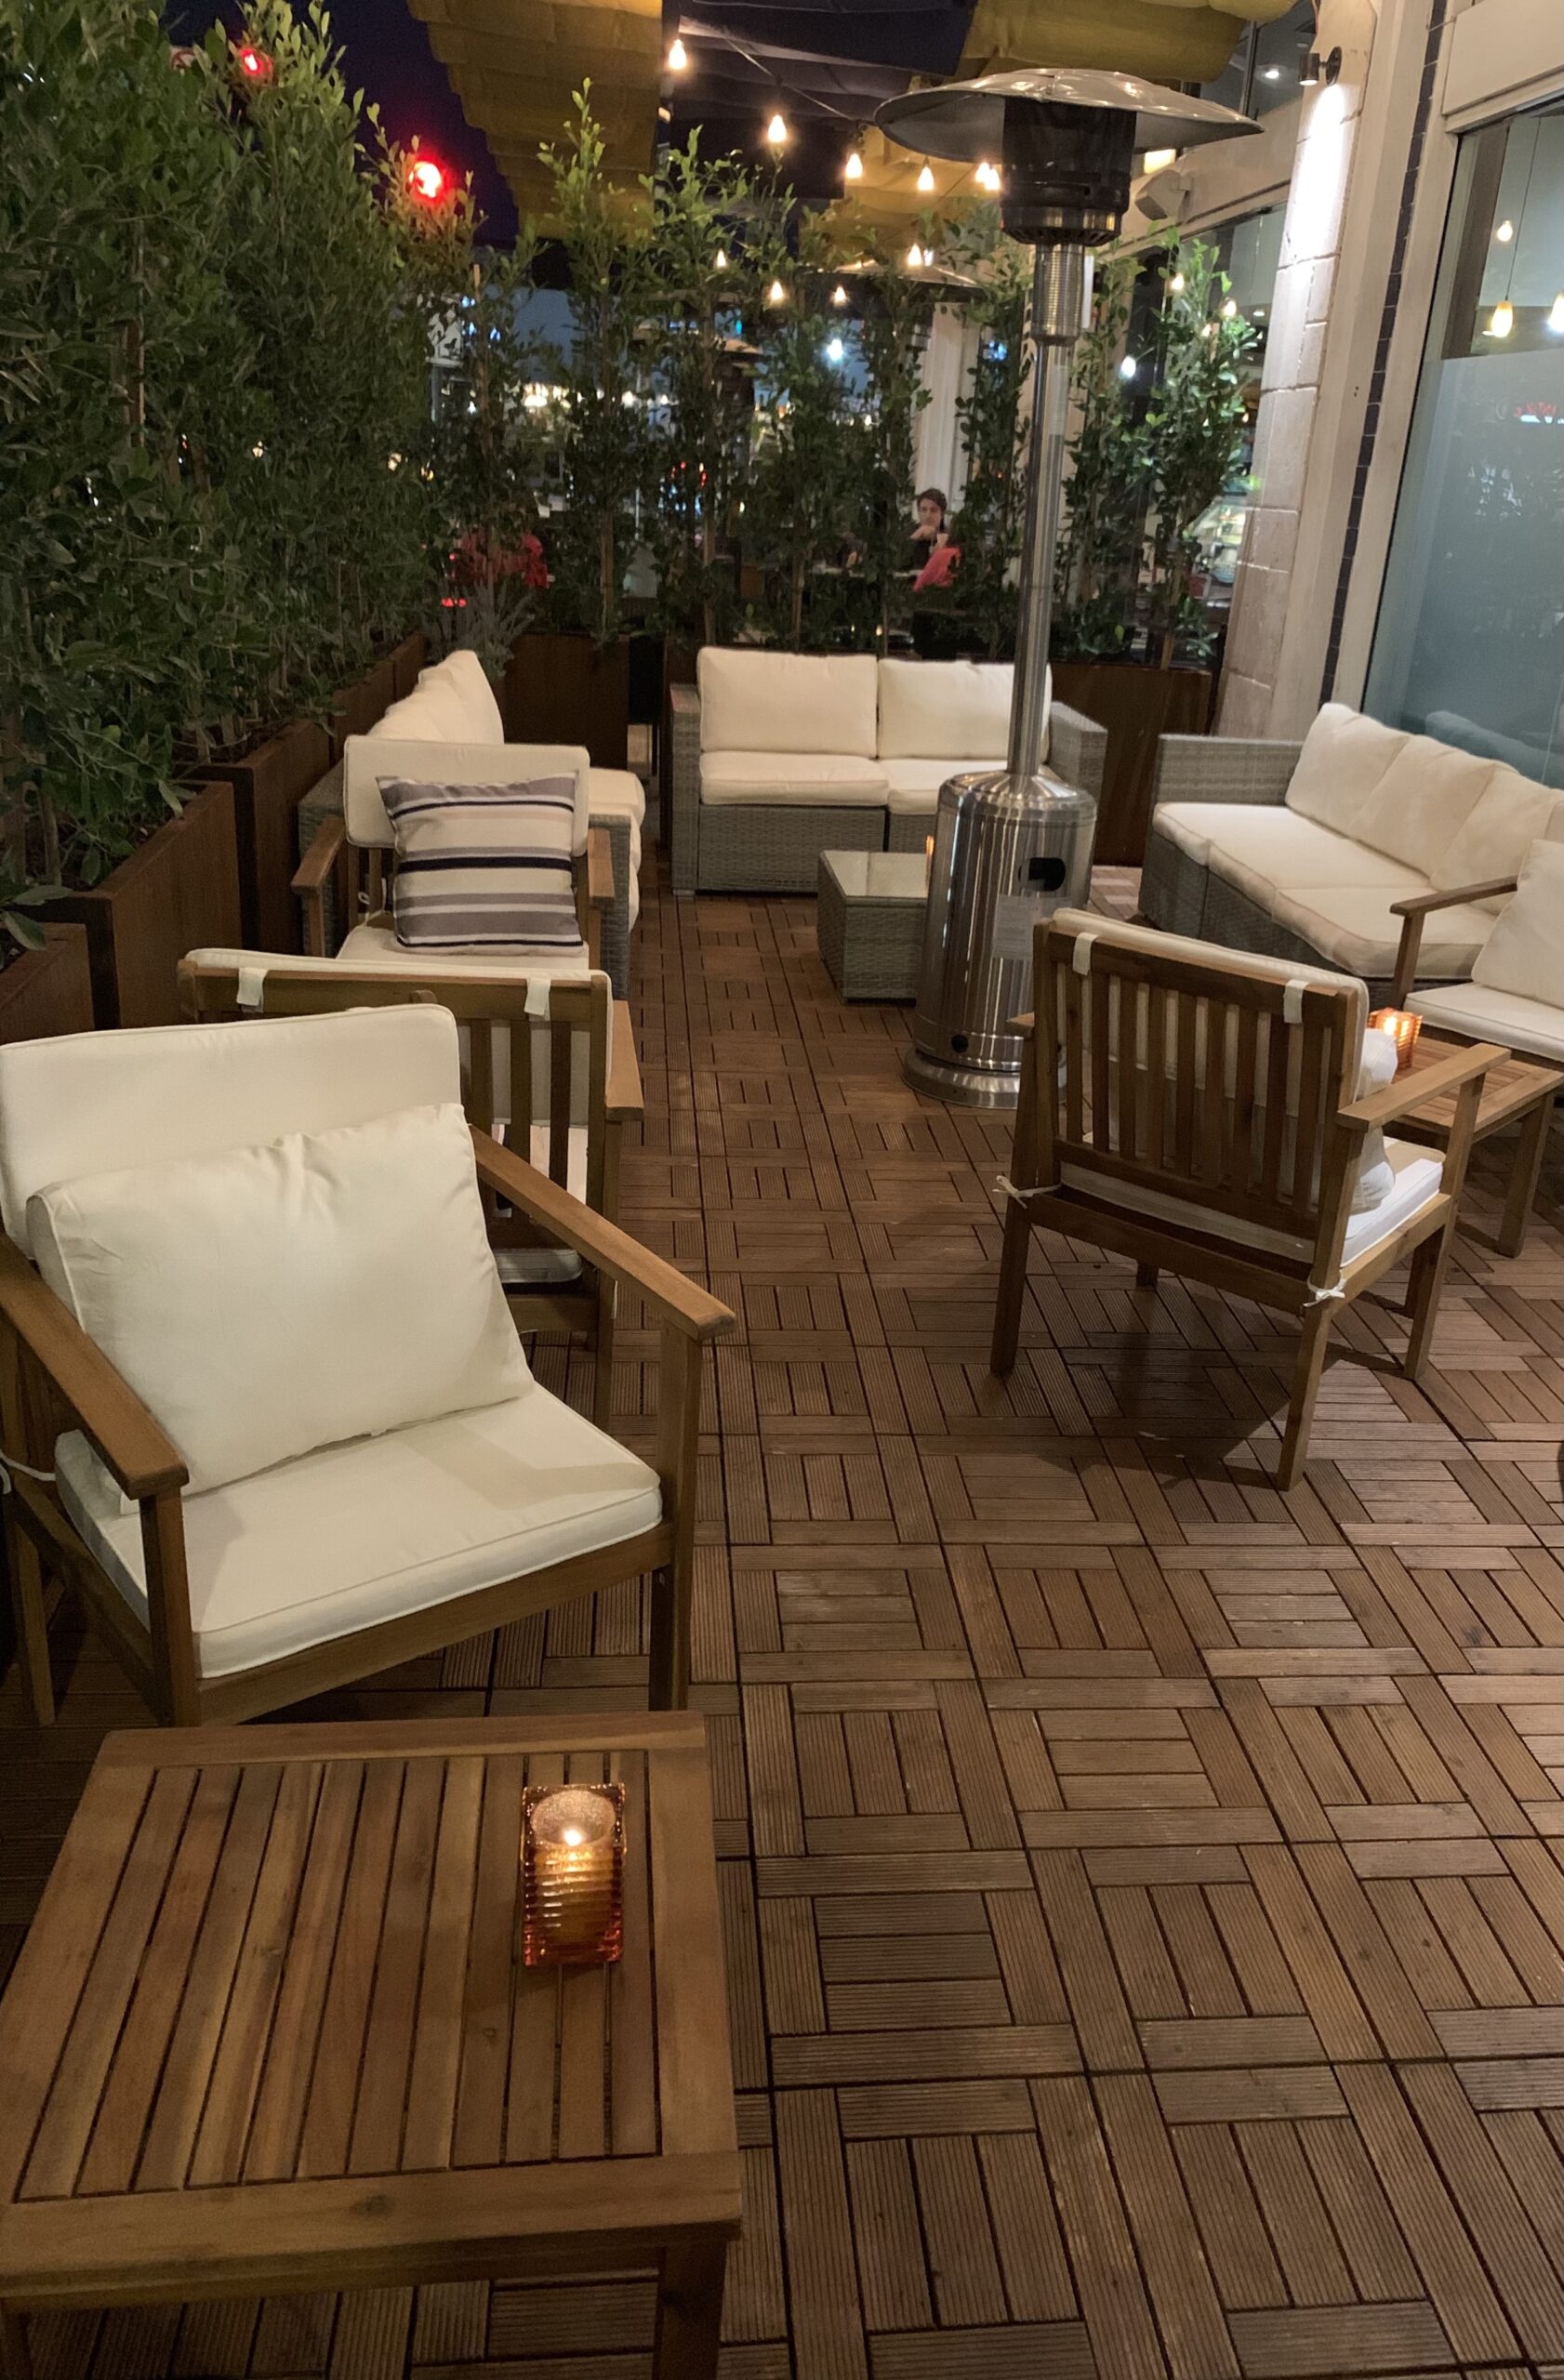 Mature, moody, yet elegant, Culver City's The Lounge at Ugo is perfect for drinks after work, date night, dinner with friends, events, and parties.